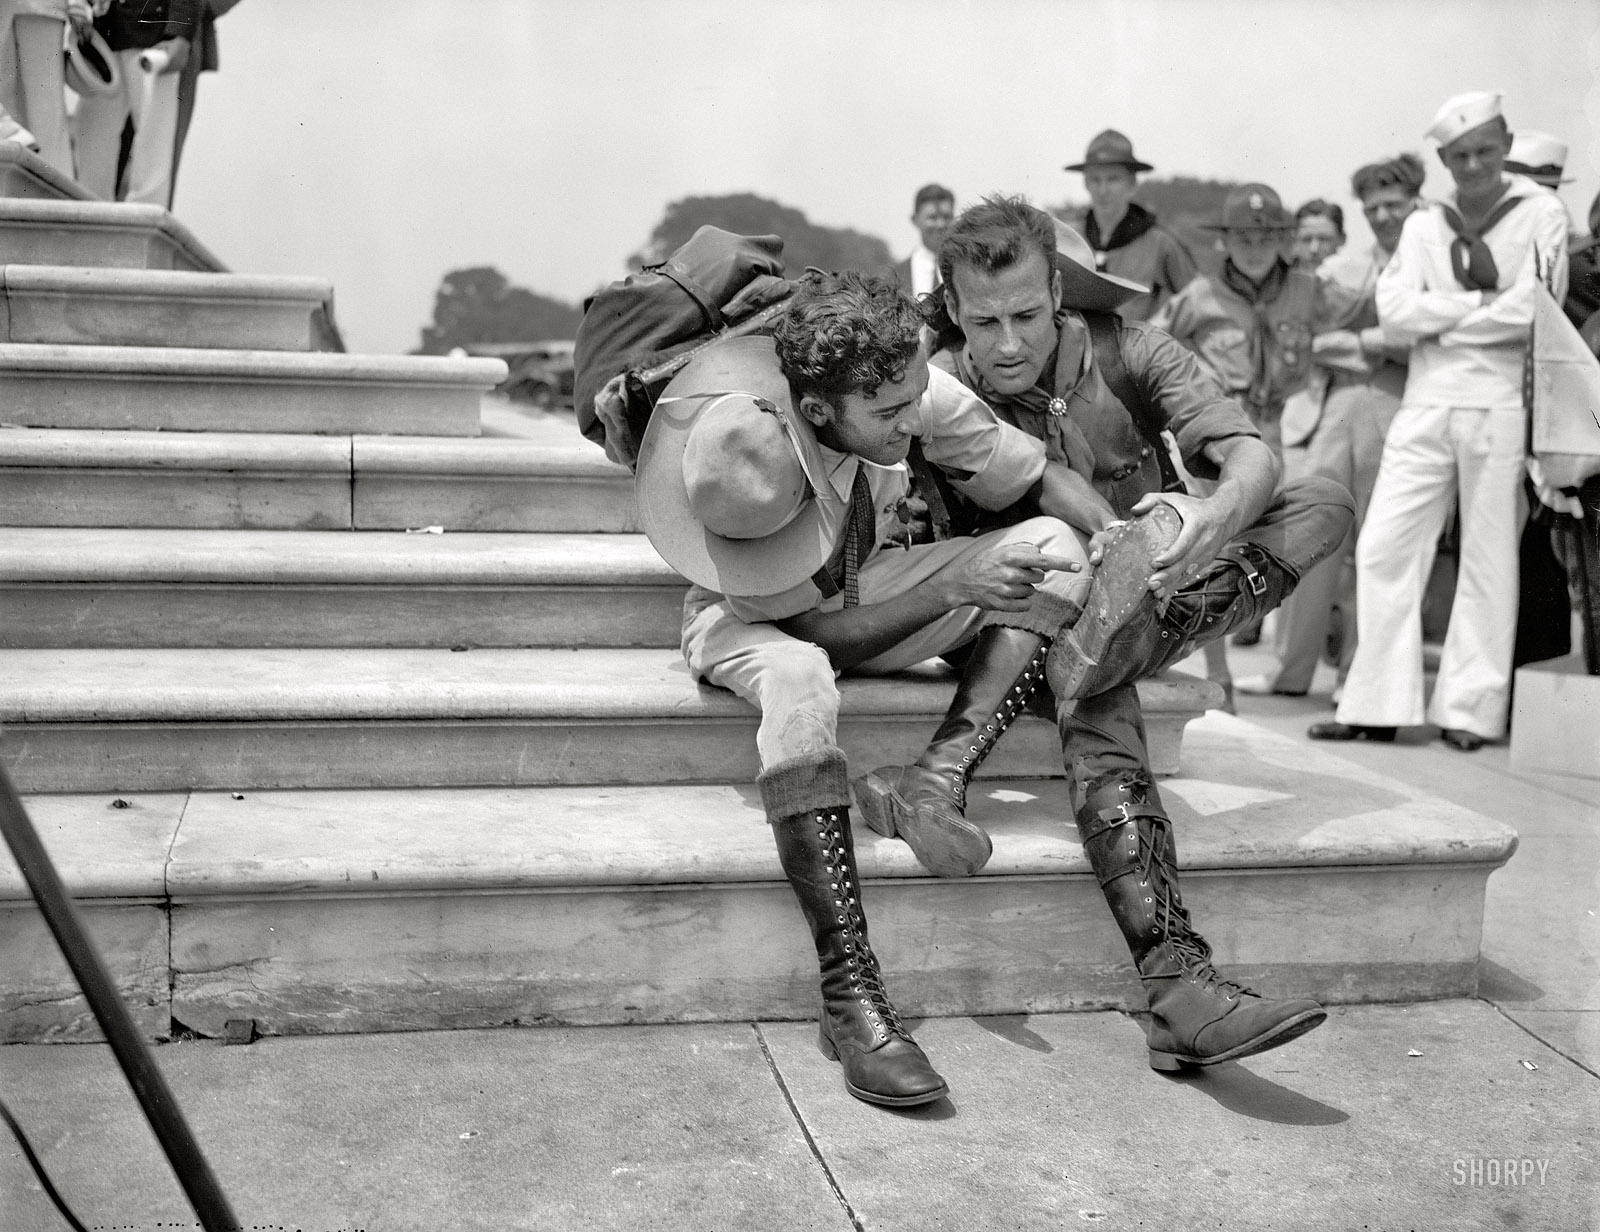 June 16, 1937. "Walk 800 miles to attend Boy Scout Jamboree. Two Venezuelan Boy Scouts, Rafael Angel Petit, left, and Juan Carmona, examining their boots after tramping 25 miles a day for two years in order to attend the Boy Scout Jamboree in Washington. They left Caracas Jan. 11, 1935, arriving in Washington today." Harris & Ewing Collection glass negative. View full size.